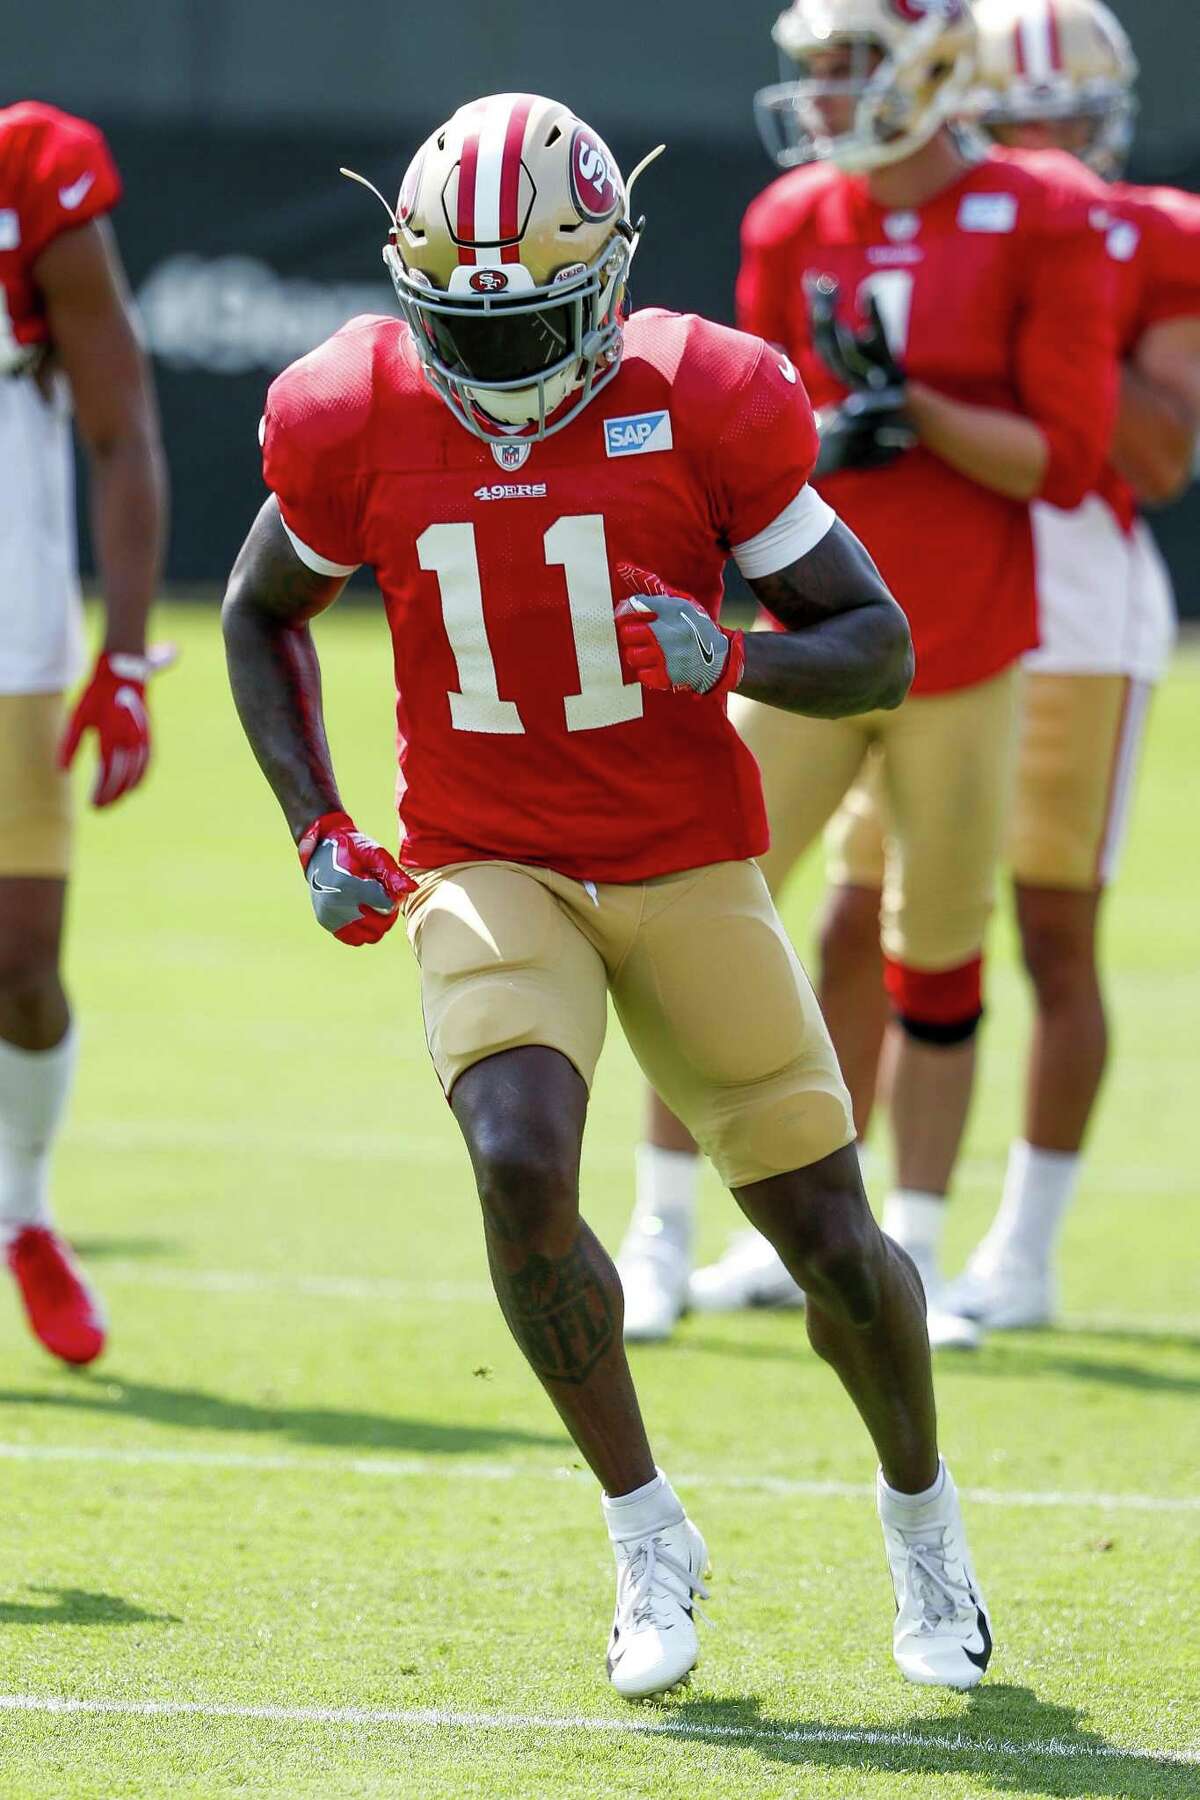 Goodwin's injuries have led to 49ers' WRs painful numbers